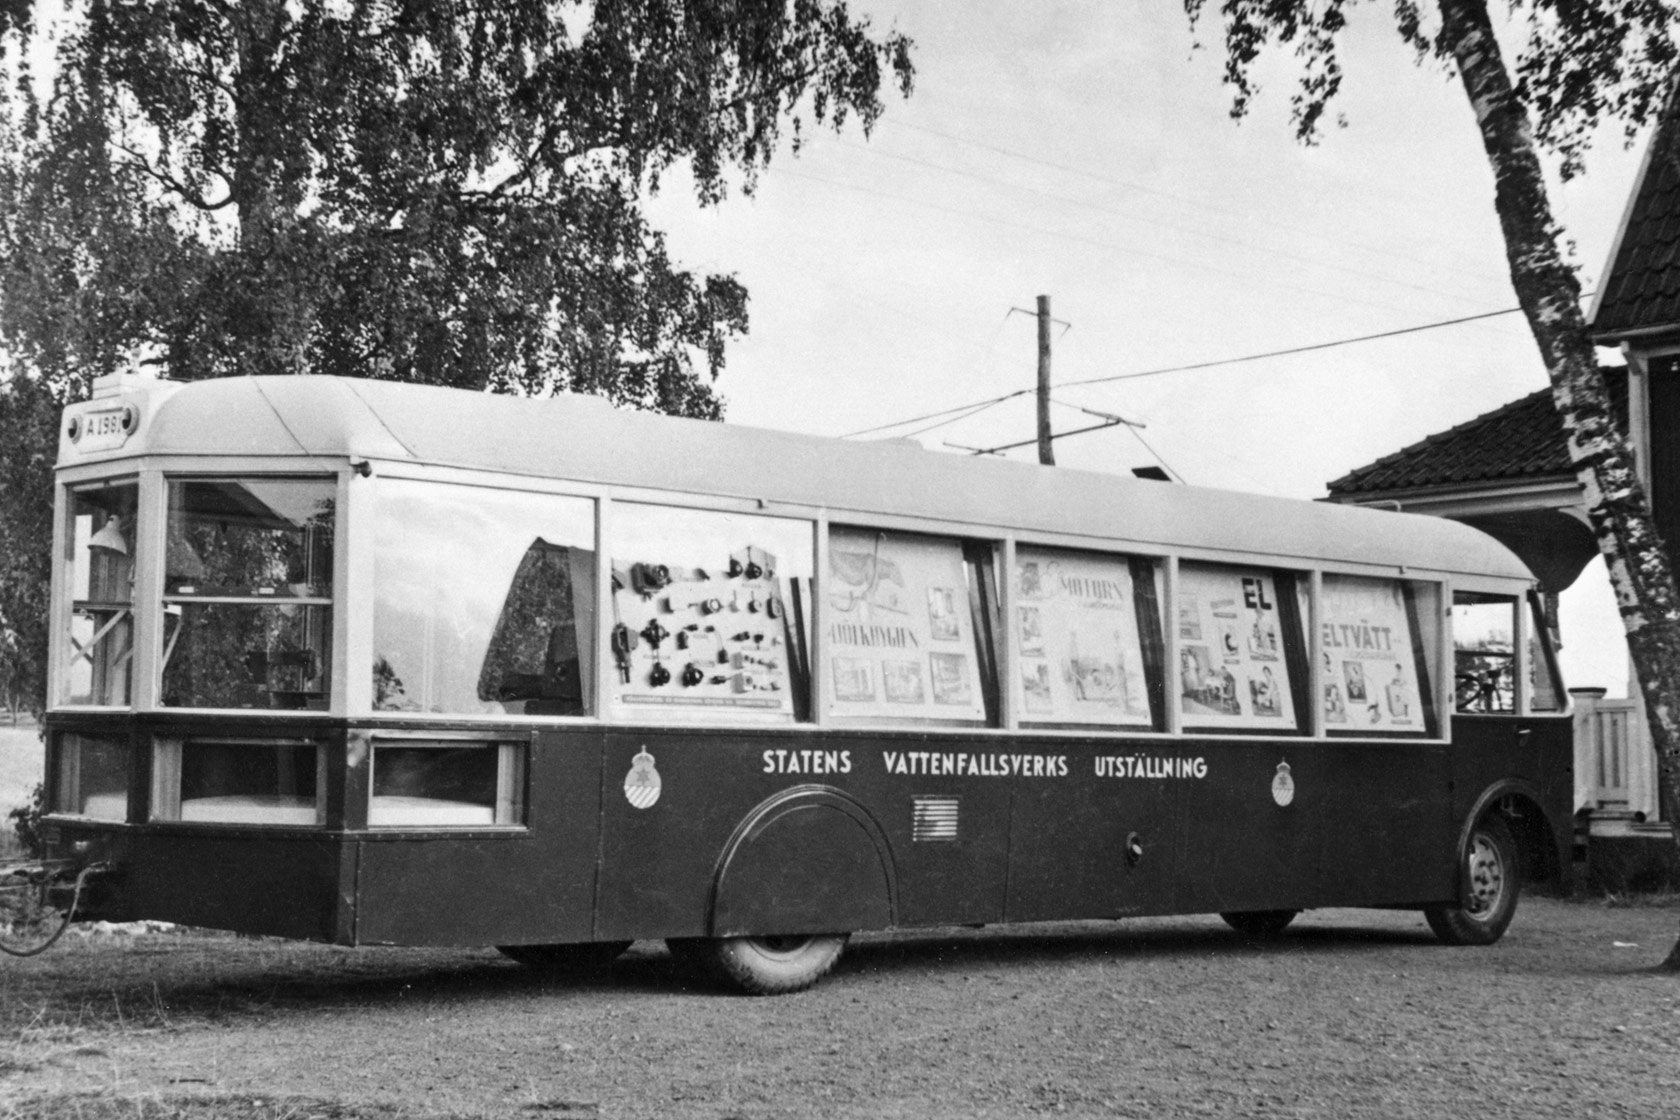 Historical photograph of an advertising bus